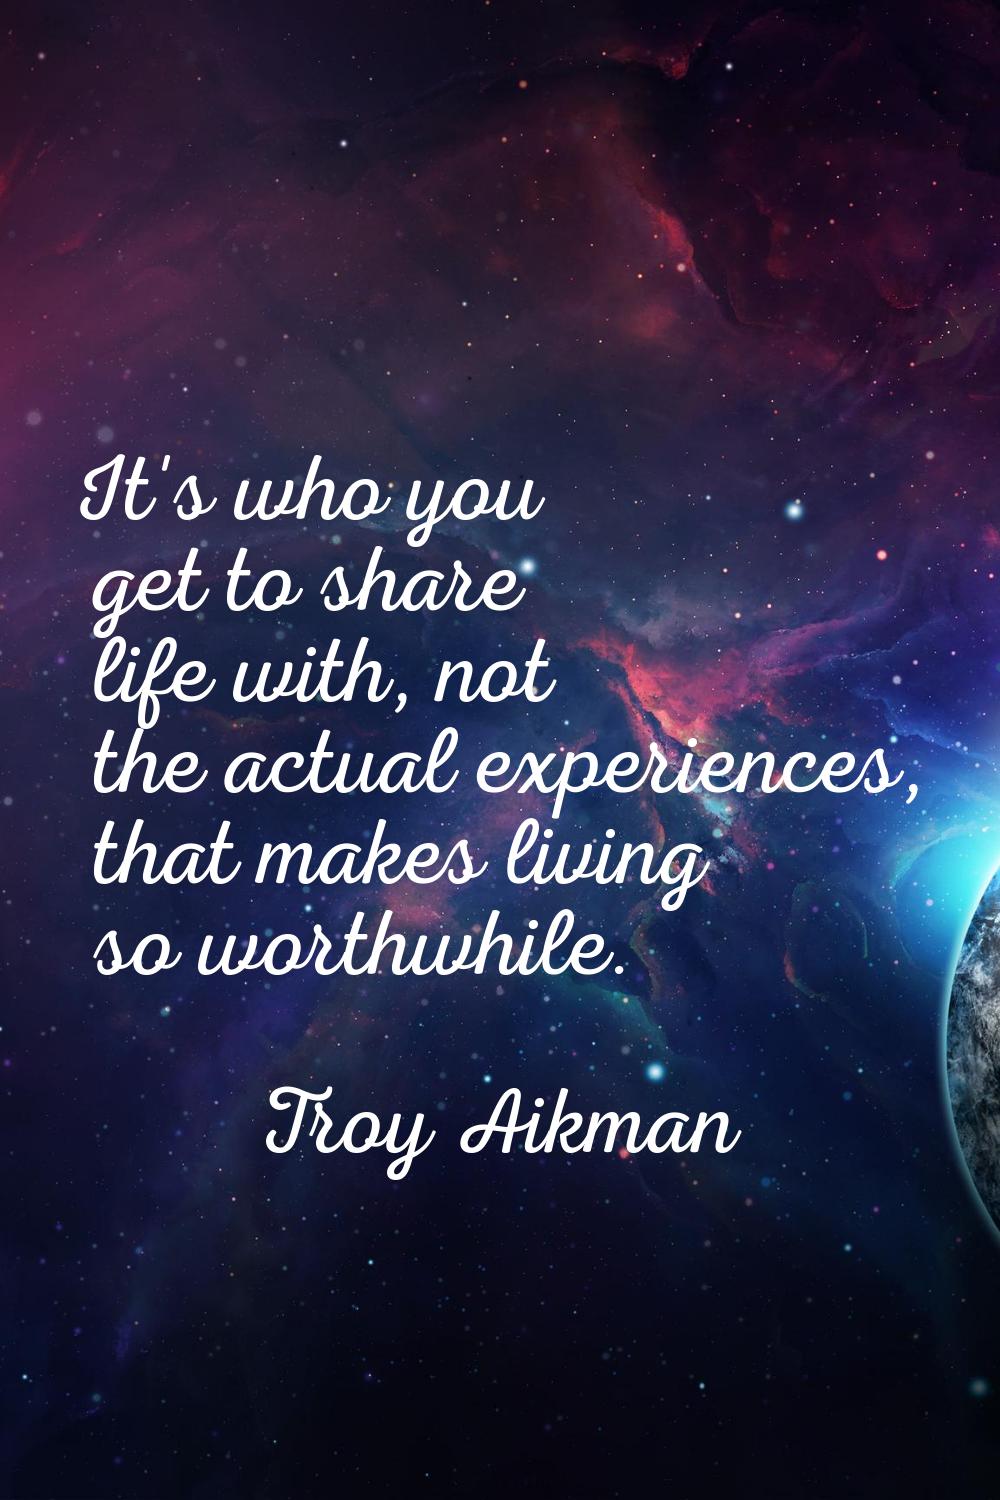 It's who you get to share life with, not the actual experiences, that makes living so worthwhile.